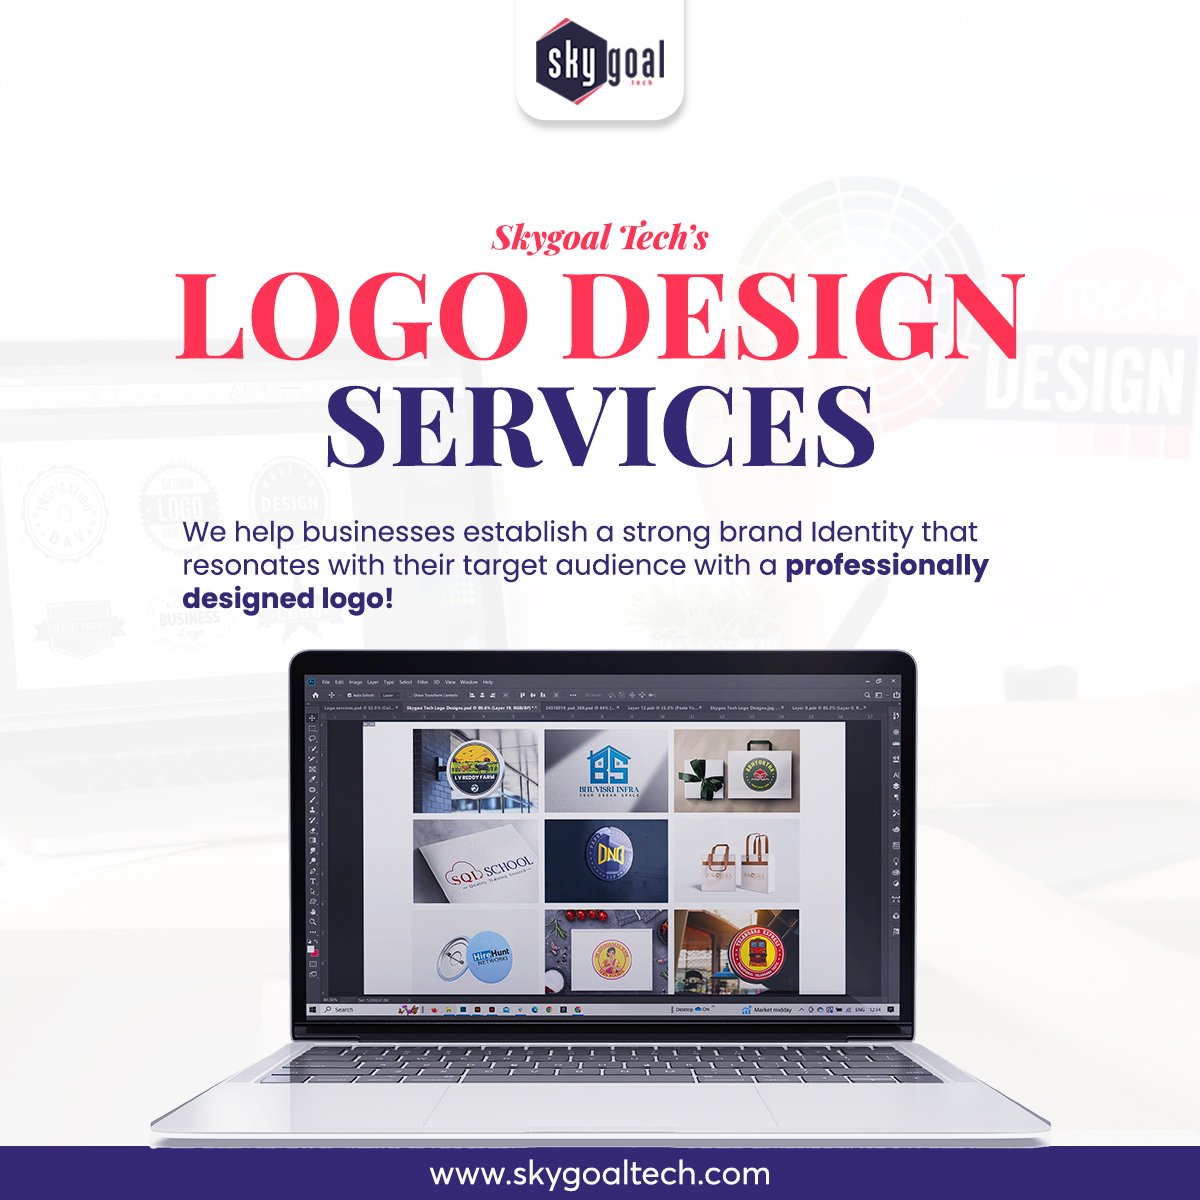 Make a lasting impression with a professionally designed logo! Skygoal Tech's logo design services help businesses establish a strong brand identity that resonates with their target audience.
.
.
.
.
#logo #businesslogo #logodesign #graphicsdesign #brandlogo